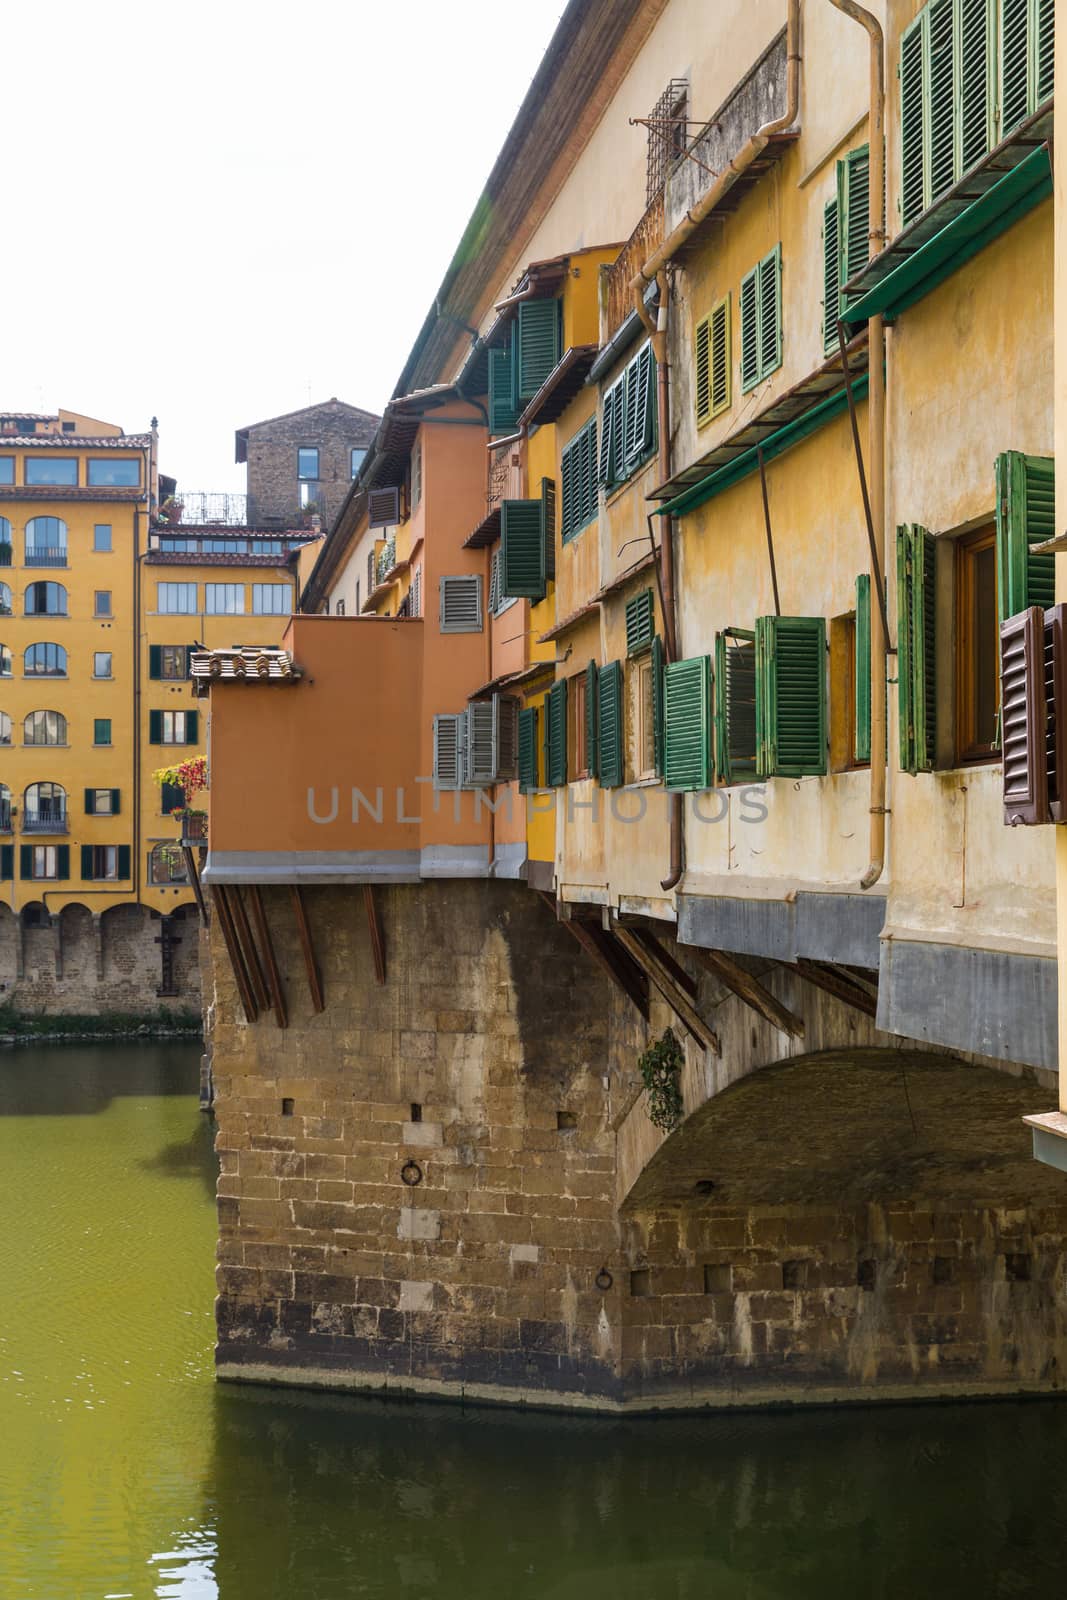 The Ponte Vecchio is a Medieval stone closed-spandrel segmental arch bridge over the Arno River, in Florence, Italy, noted for still having shops built along it, as was once common.